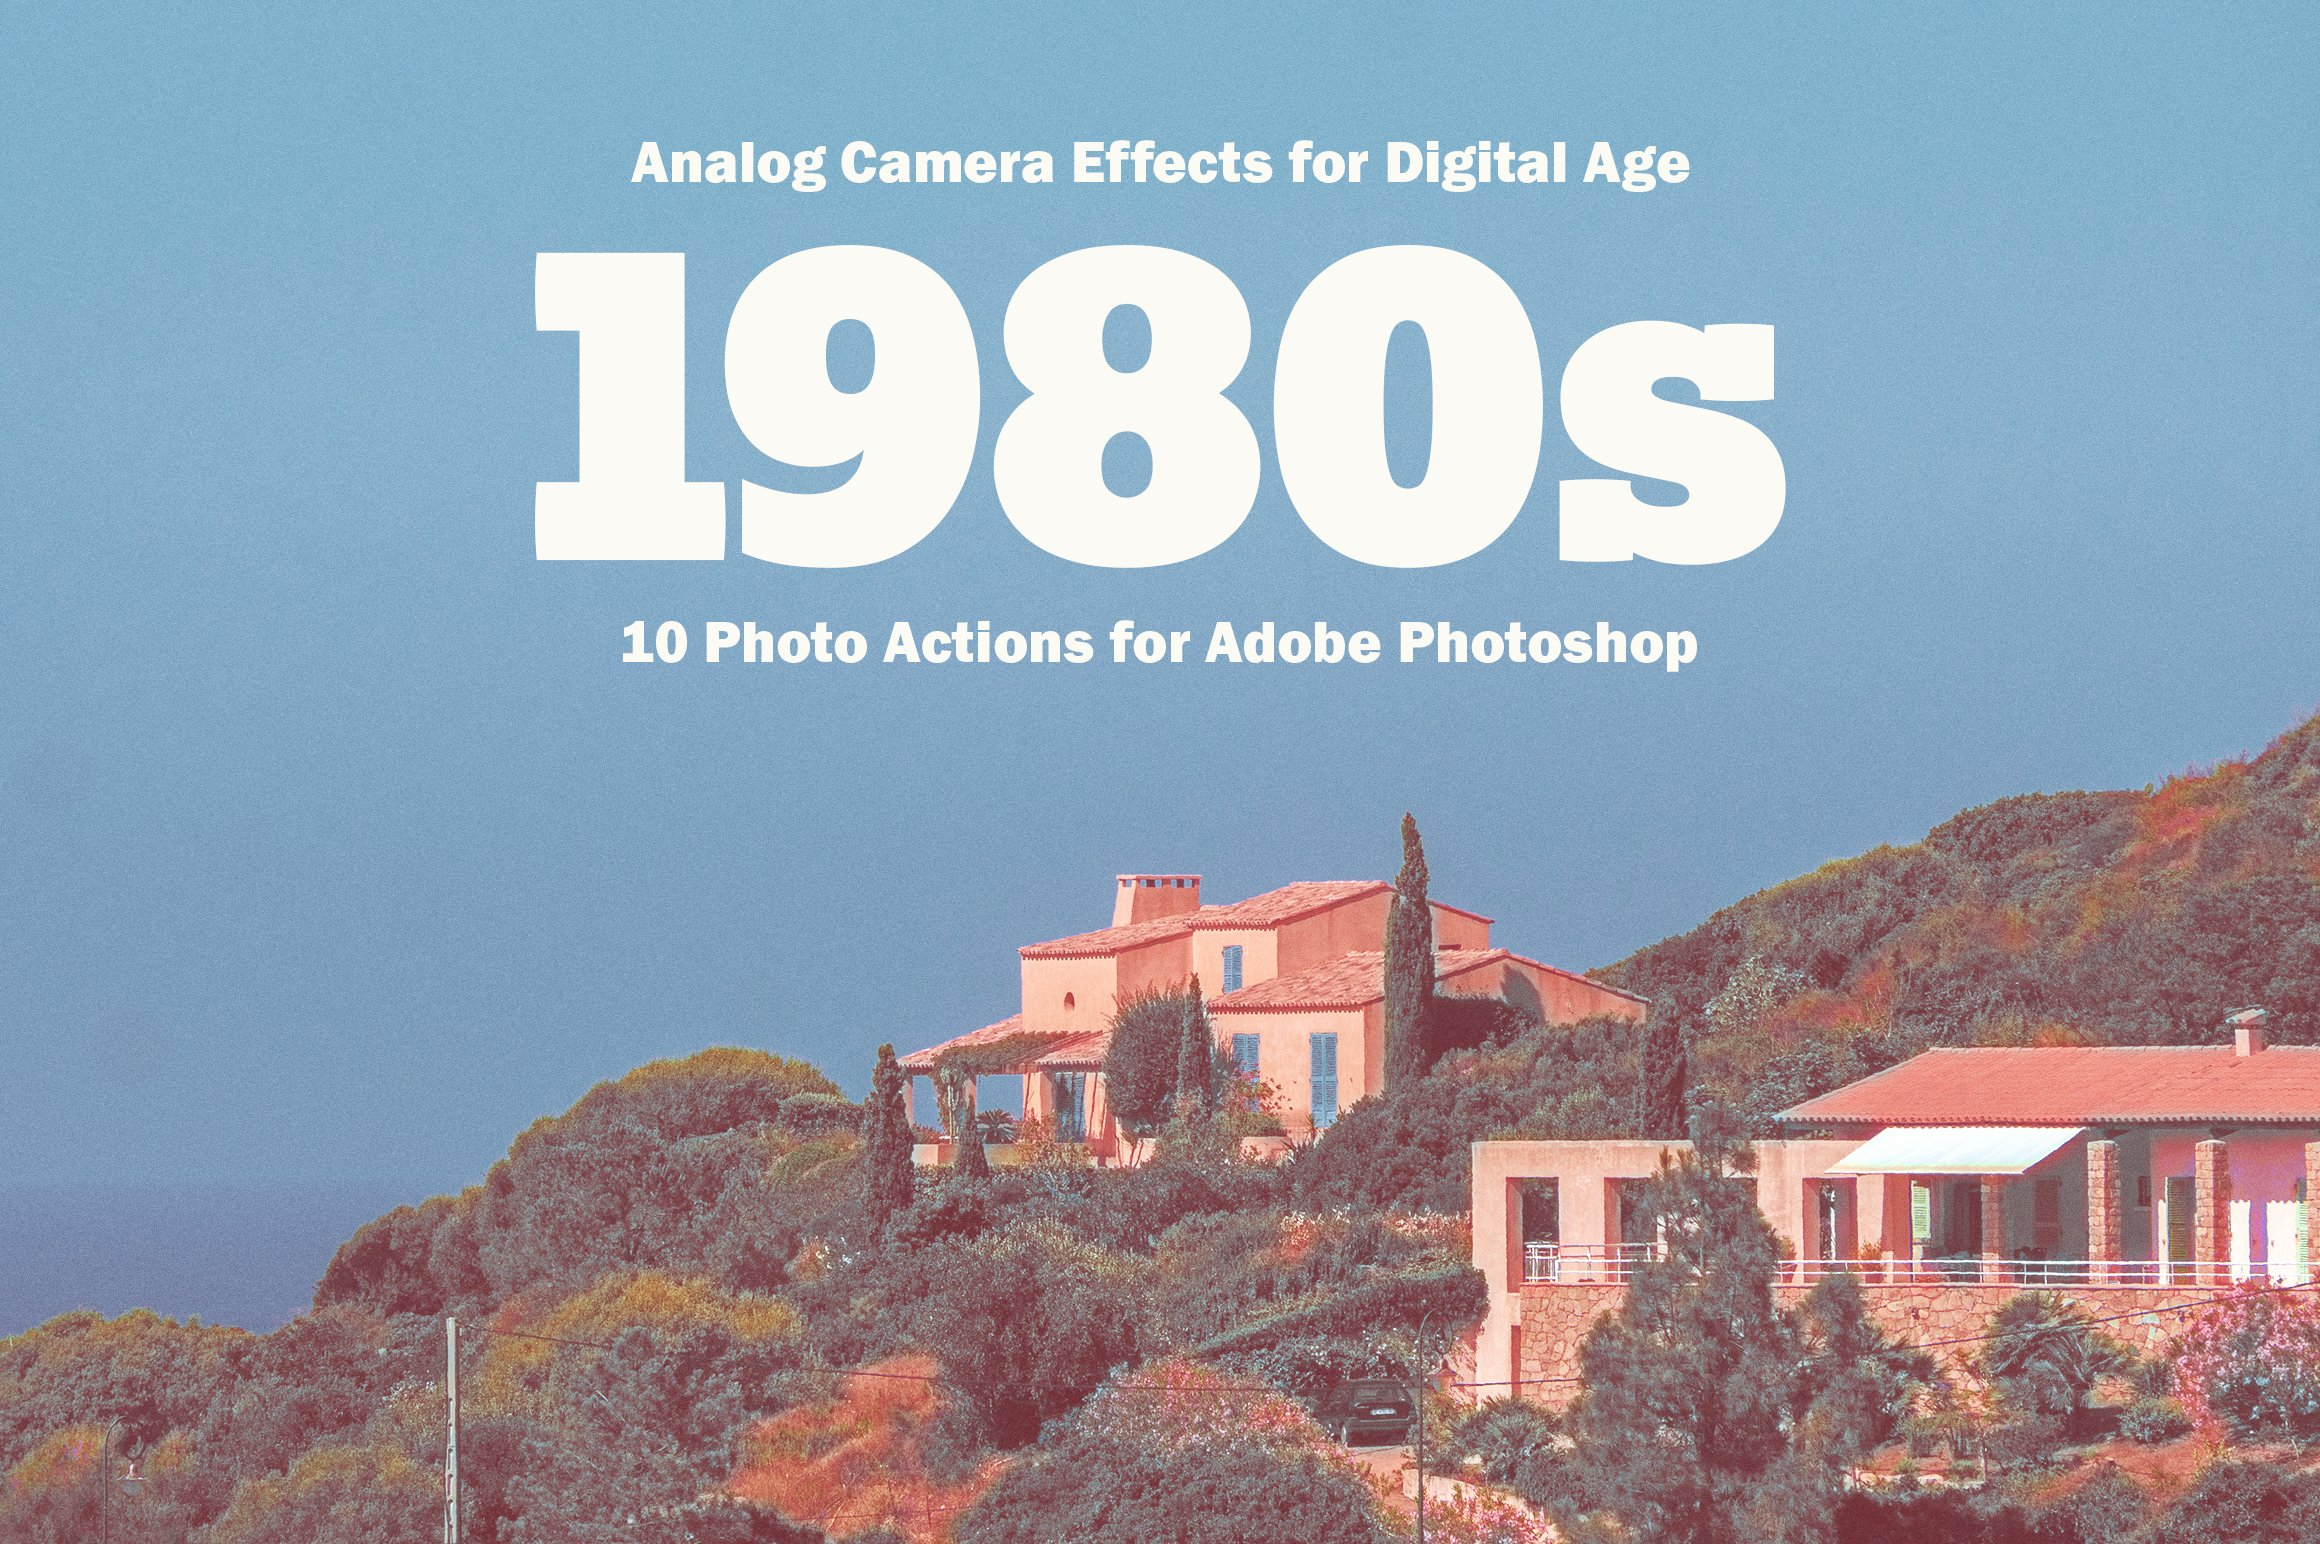 1980s Photo Actions for Photoshopcover image.